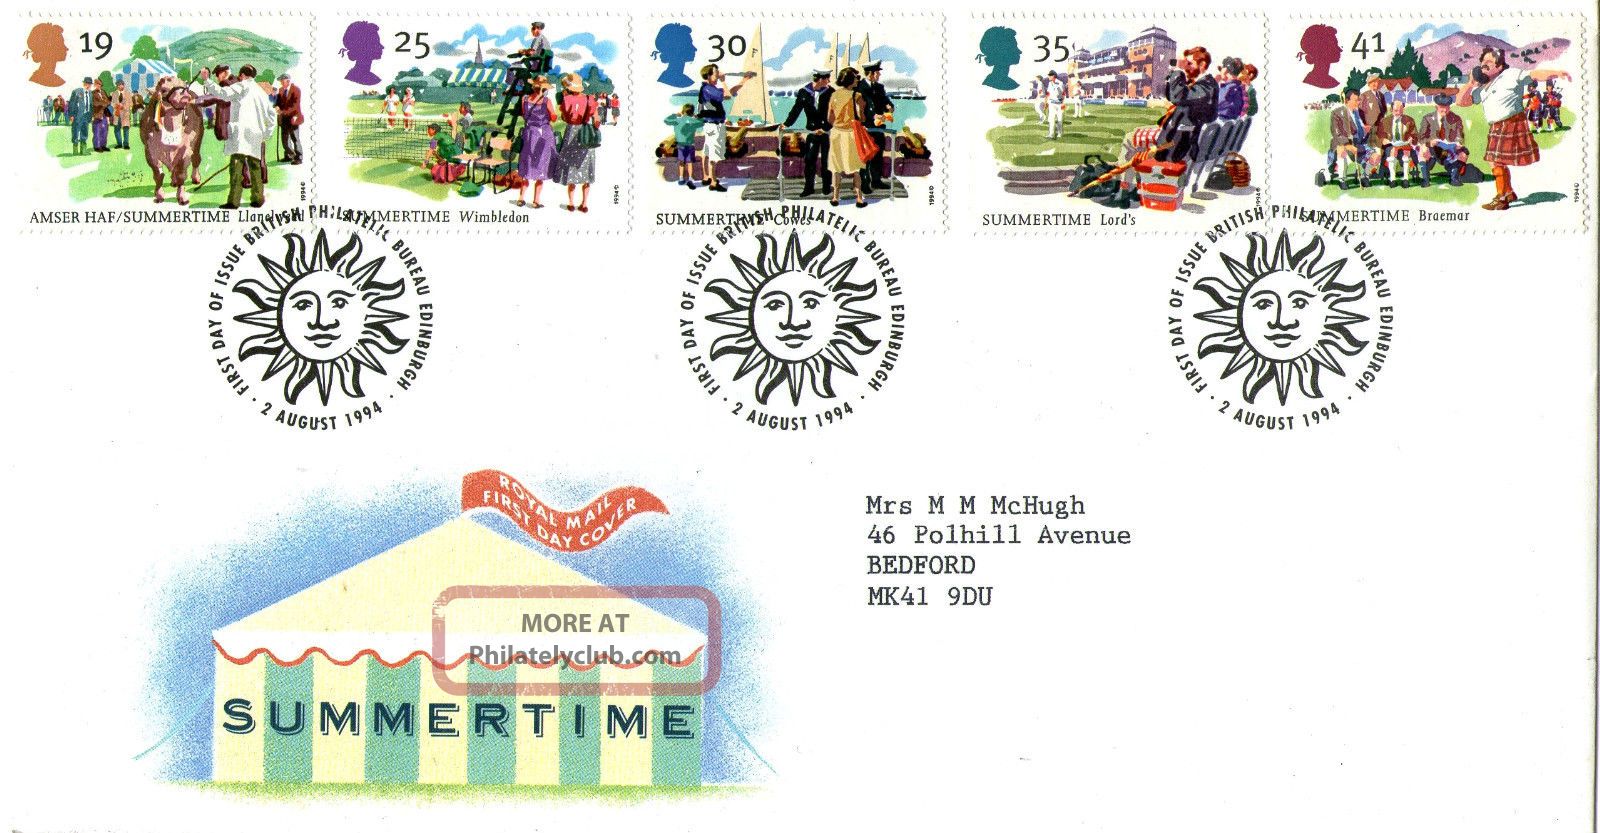 2 August 1994 Summertime Royal Mail First Day Cover Bureau Shs Topical Stamps photo